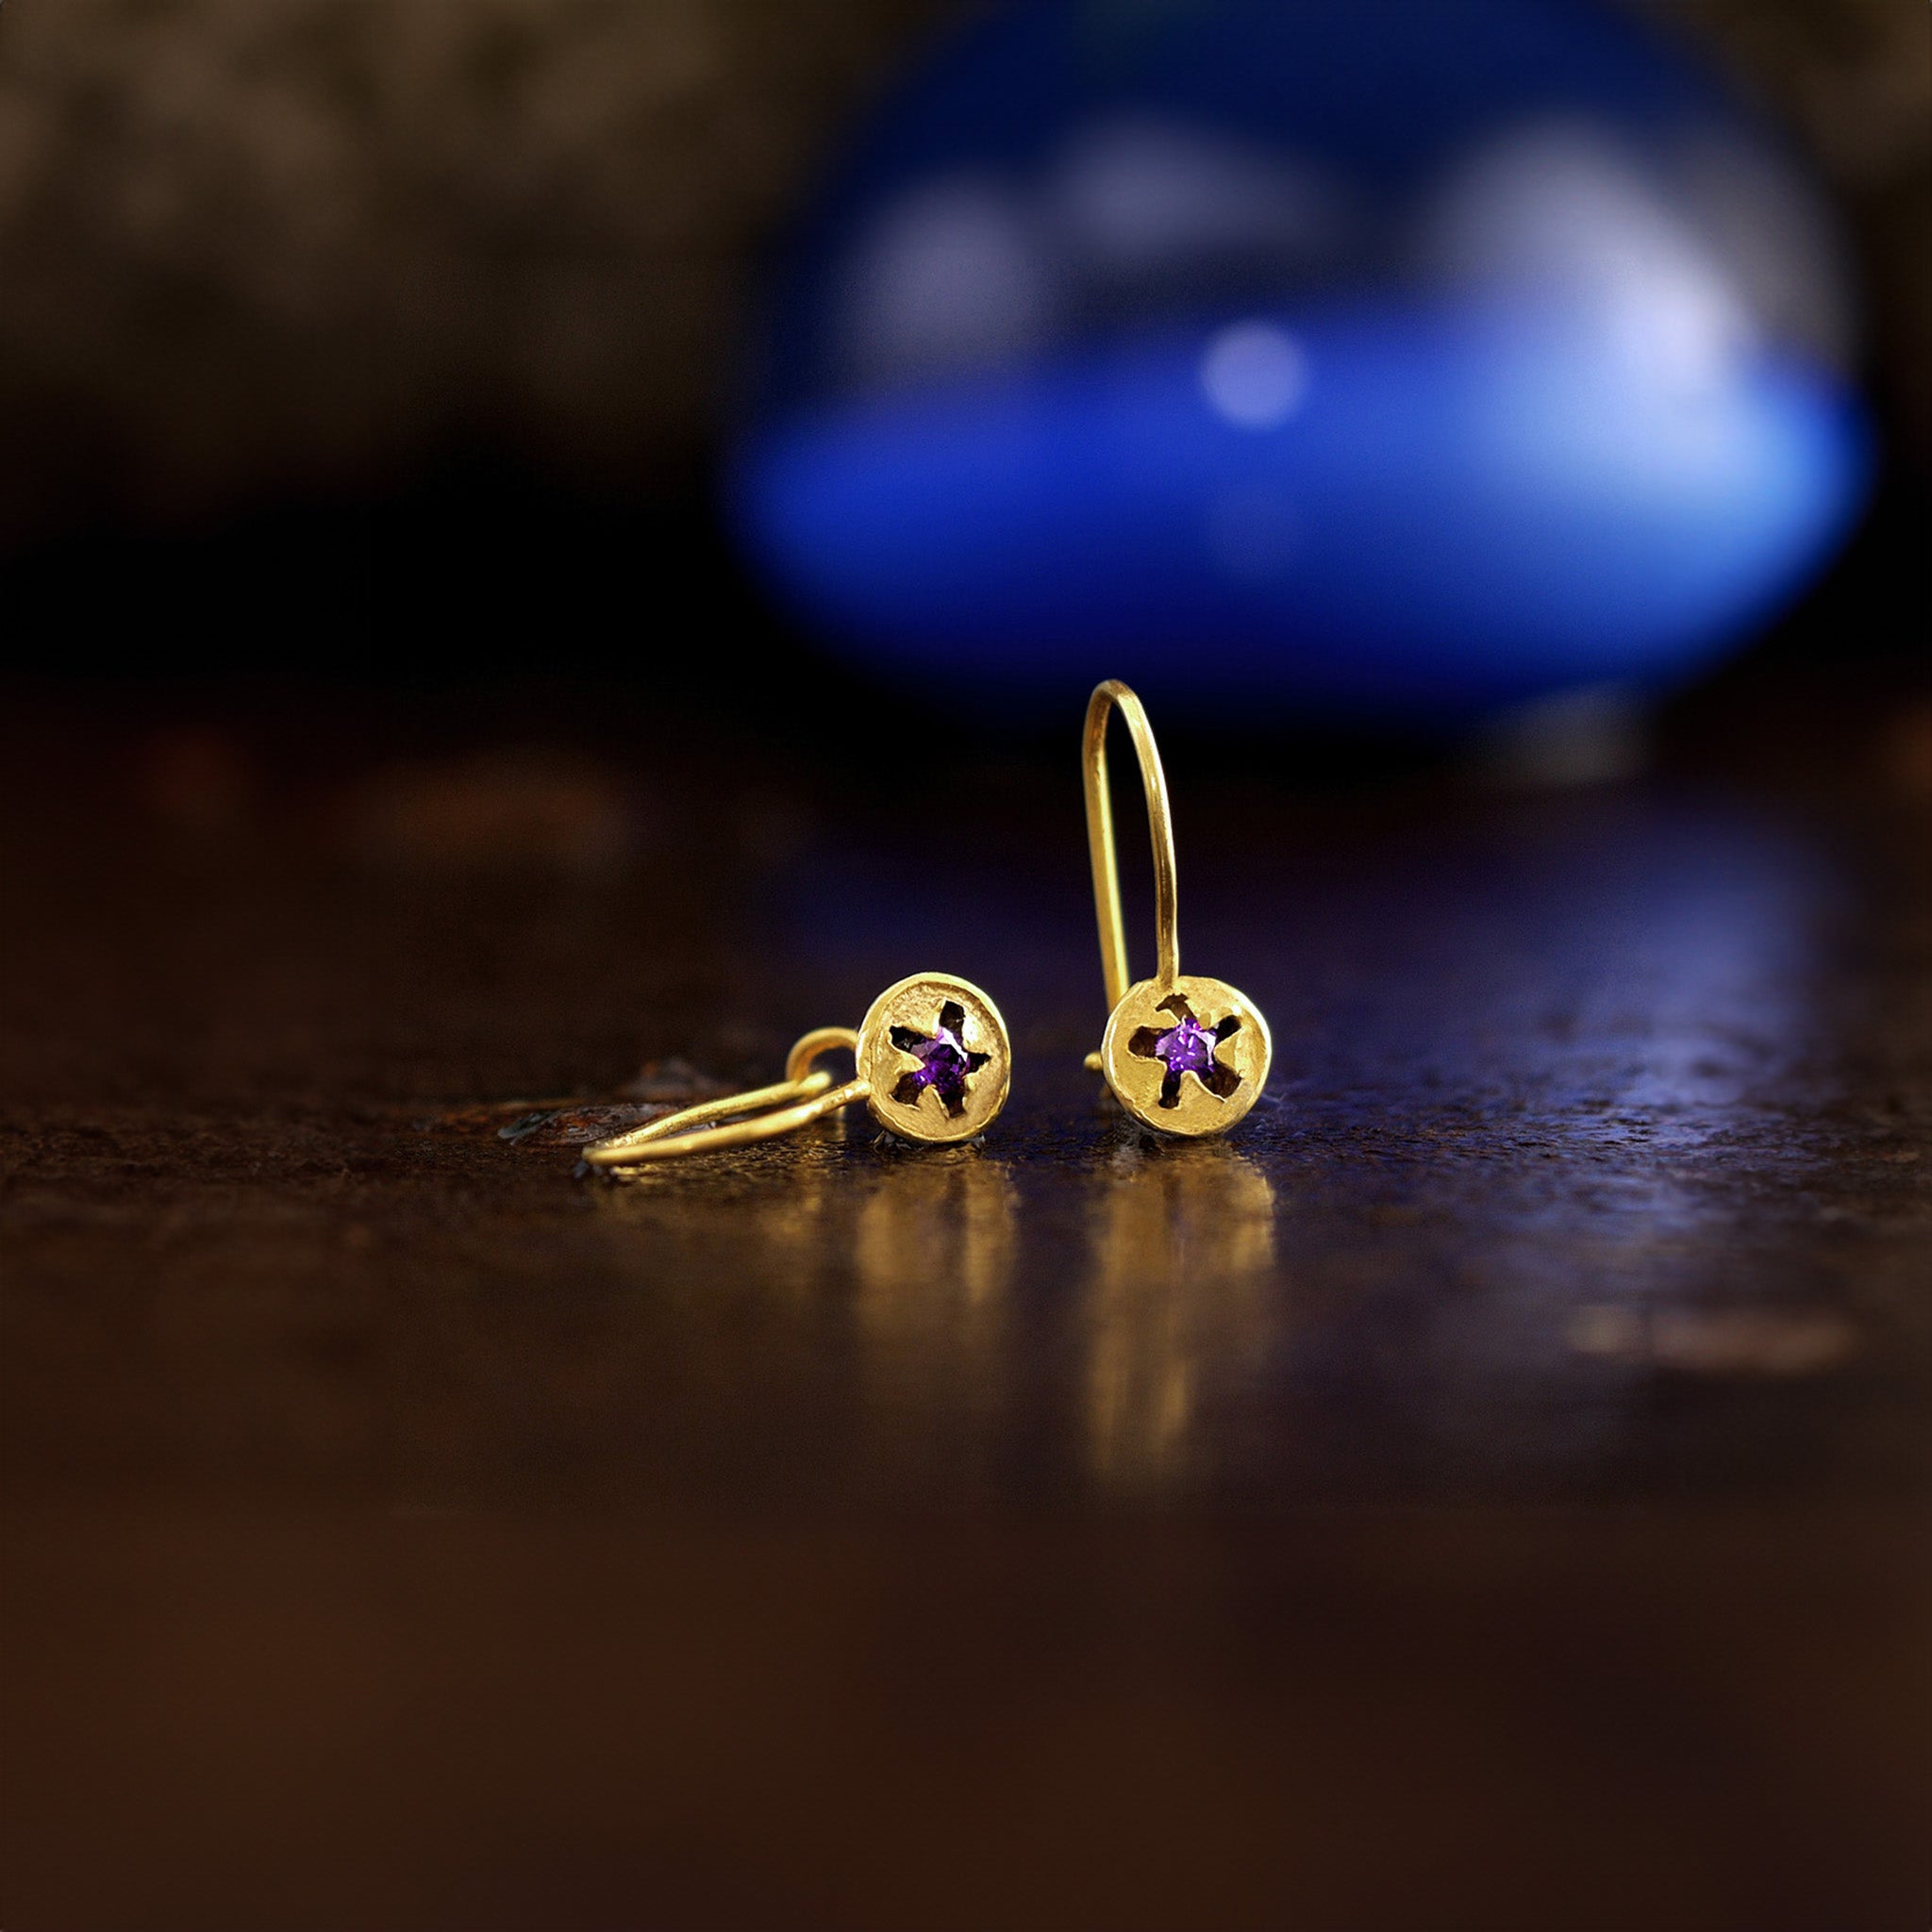 Delicate drop earrings in yellow gold, inspired by eucalyptus seeds, featuring a central inlaid amethyst stone with a dark rusty background.